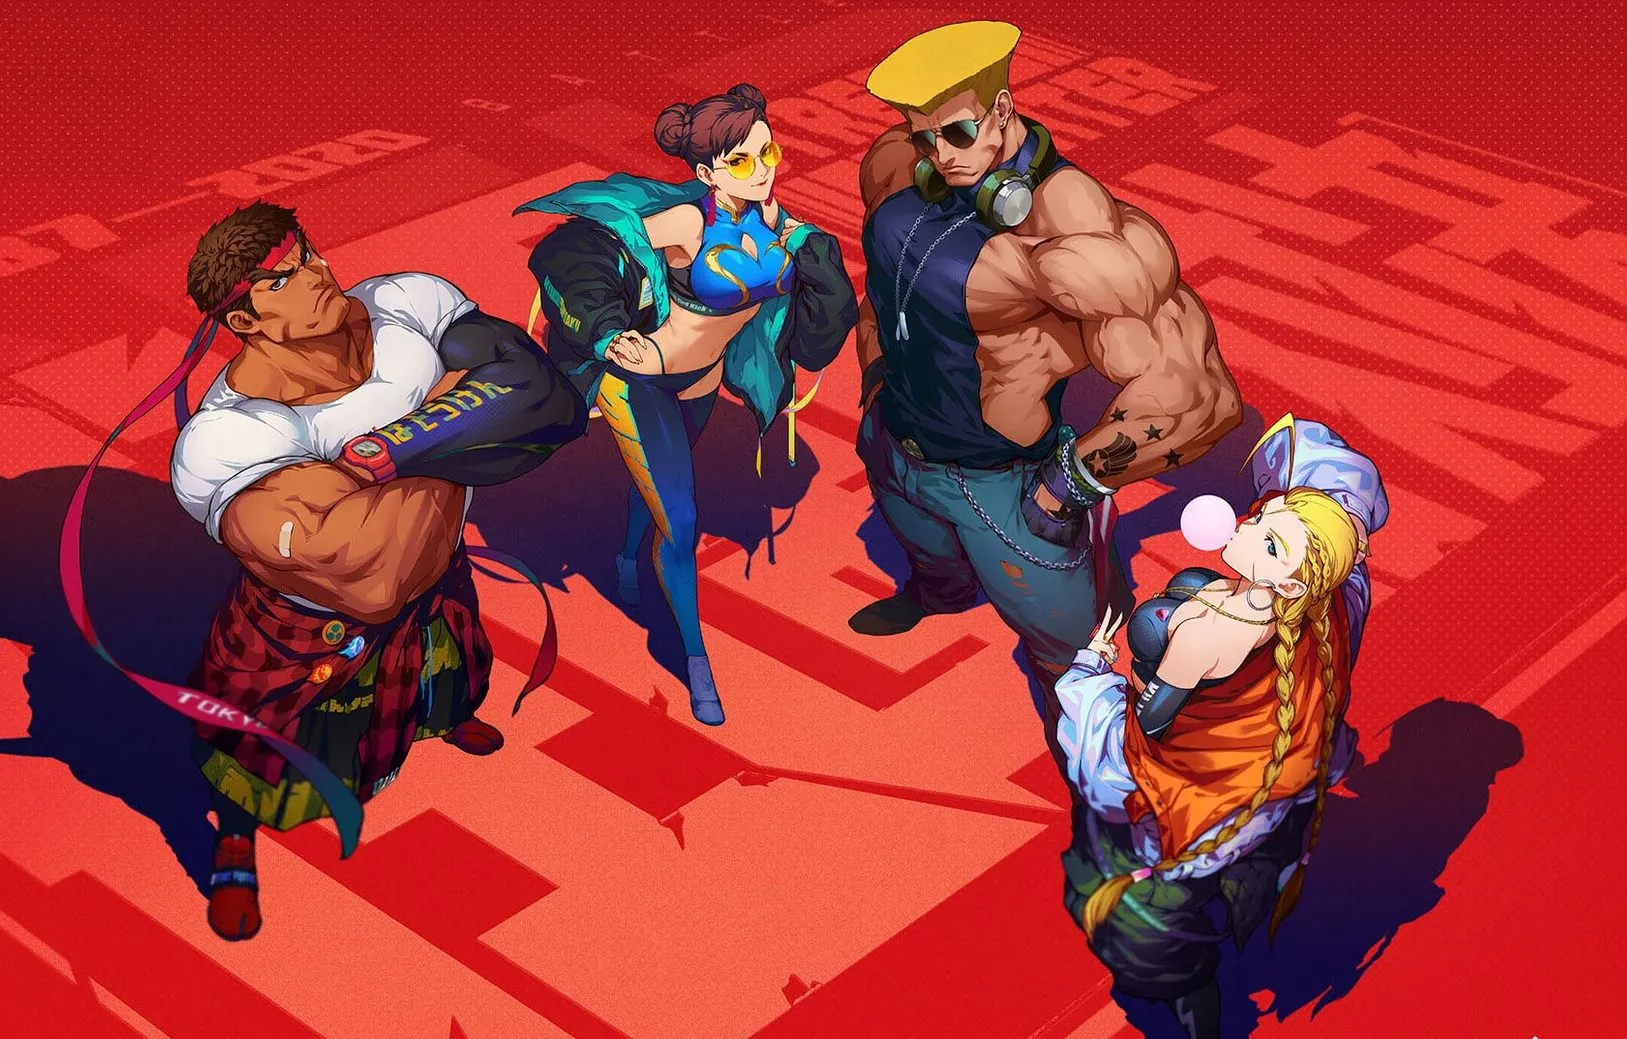 Street Fighter: The Fight's Just Begun (Tencent) - Beta Gameplay  (Android/IOS) 